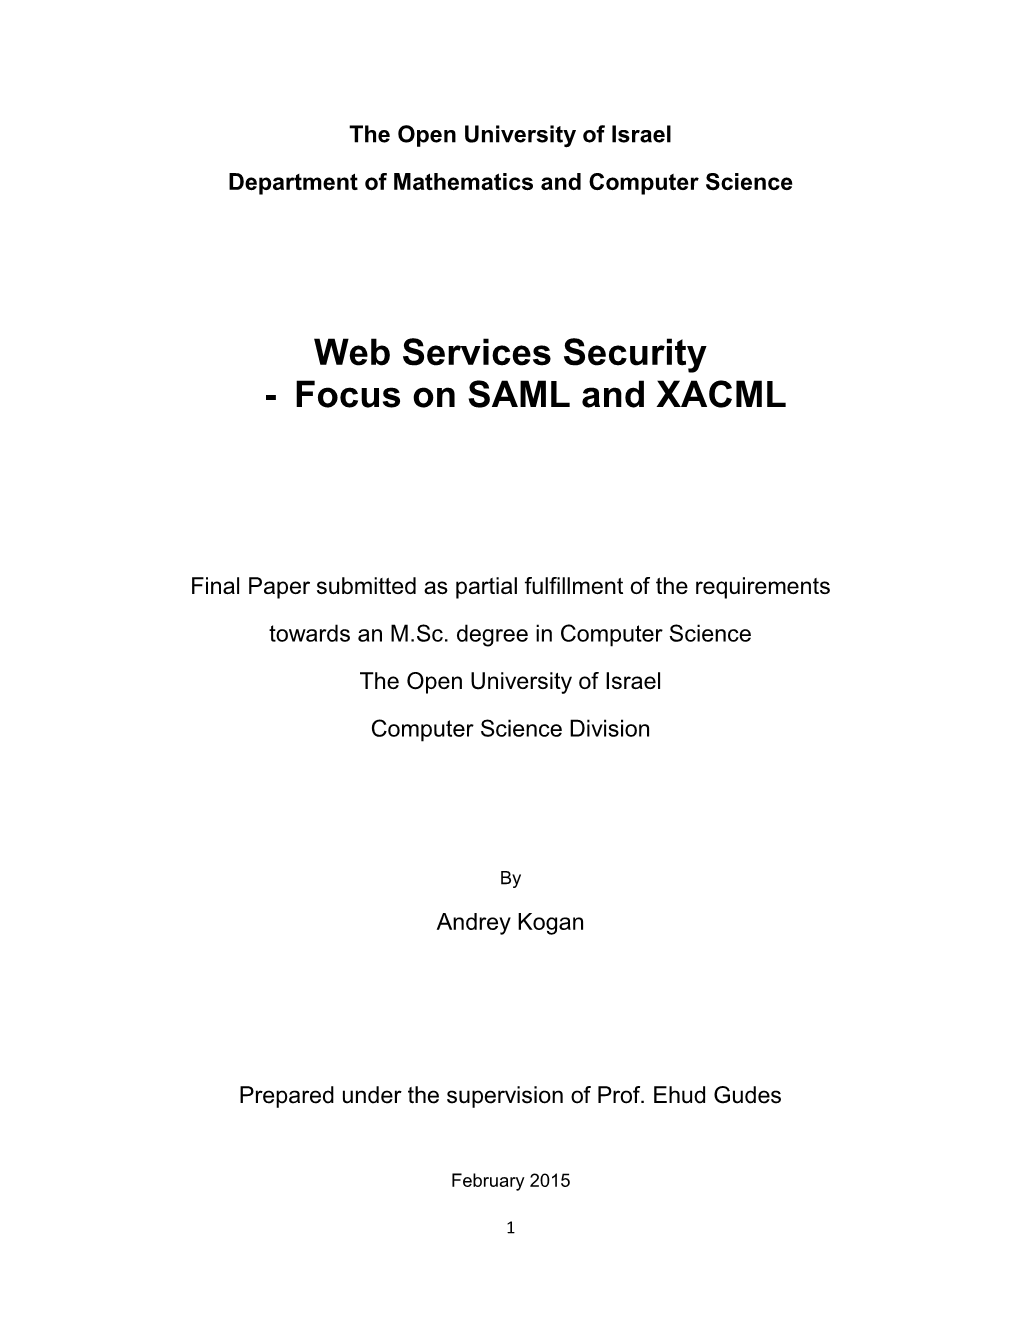 Web Services Security - Focus on SAML and XACML